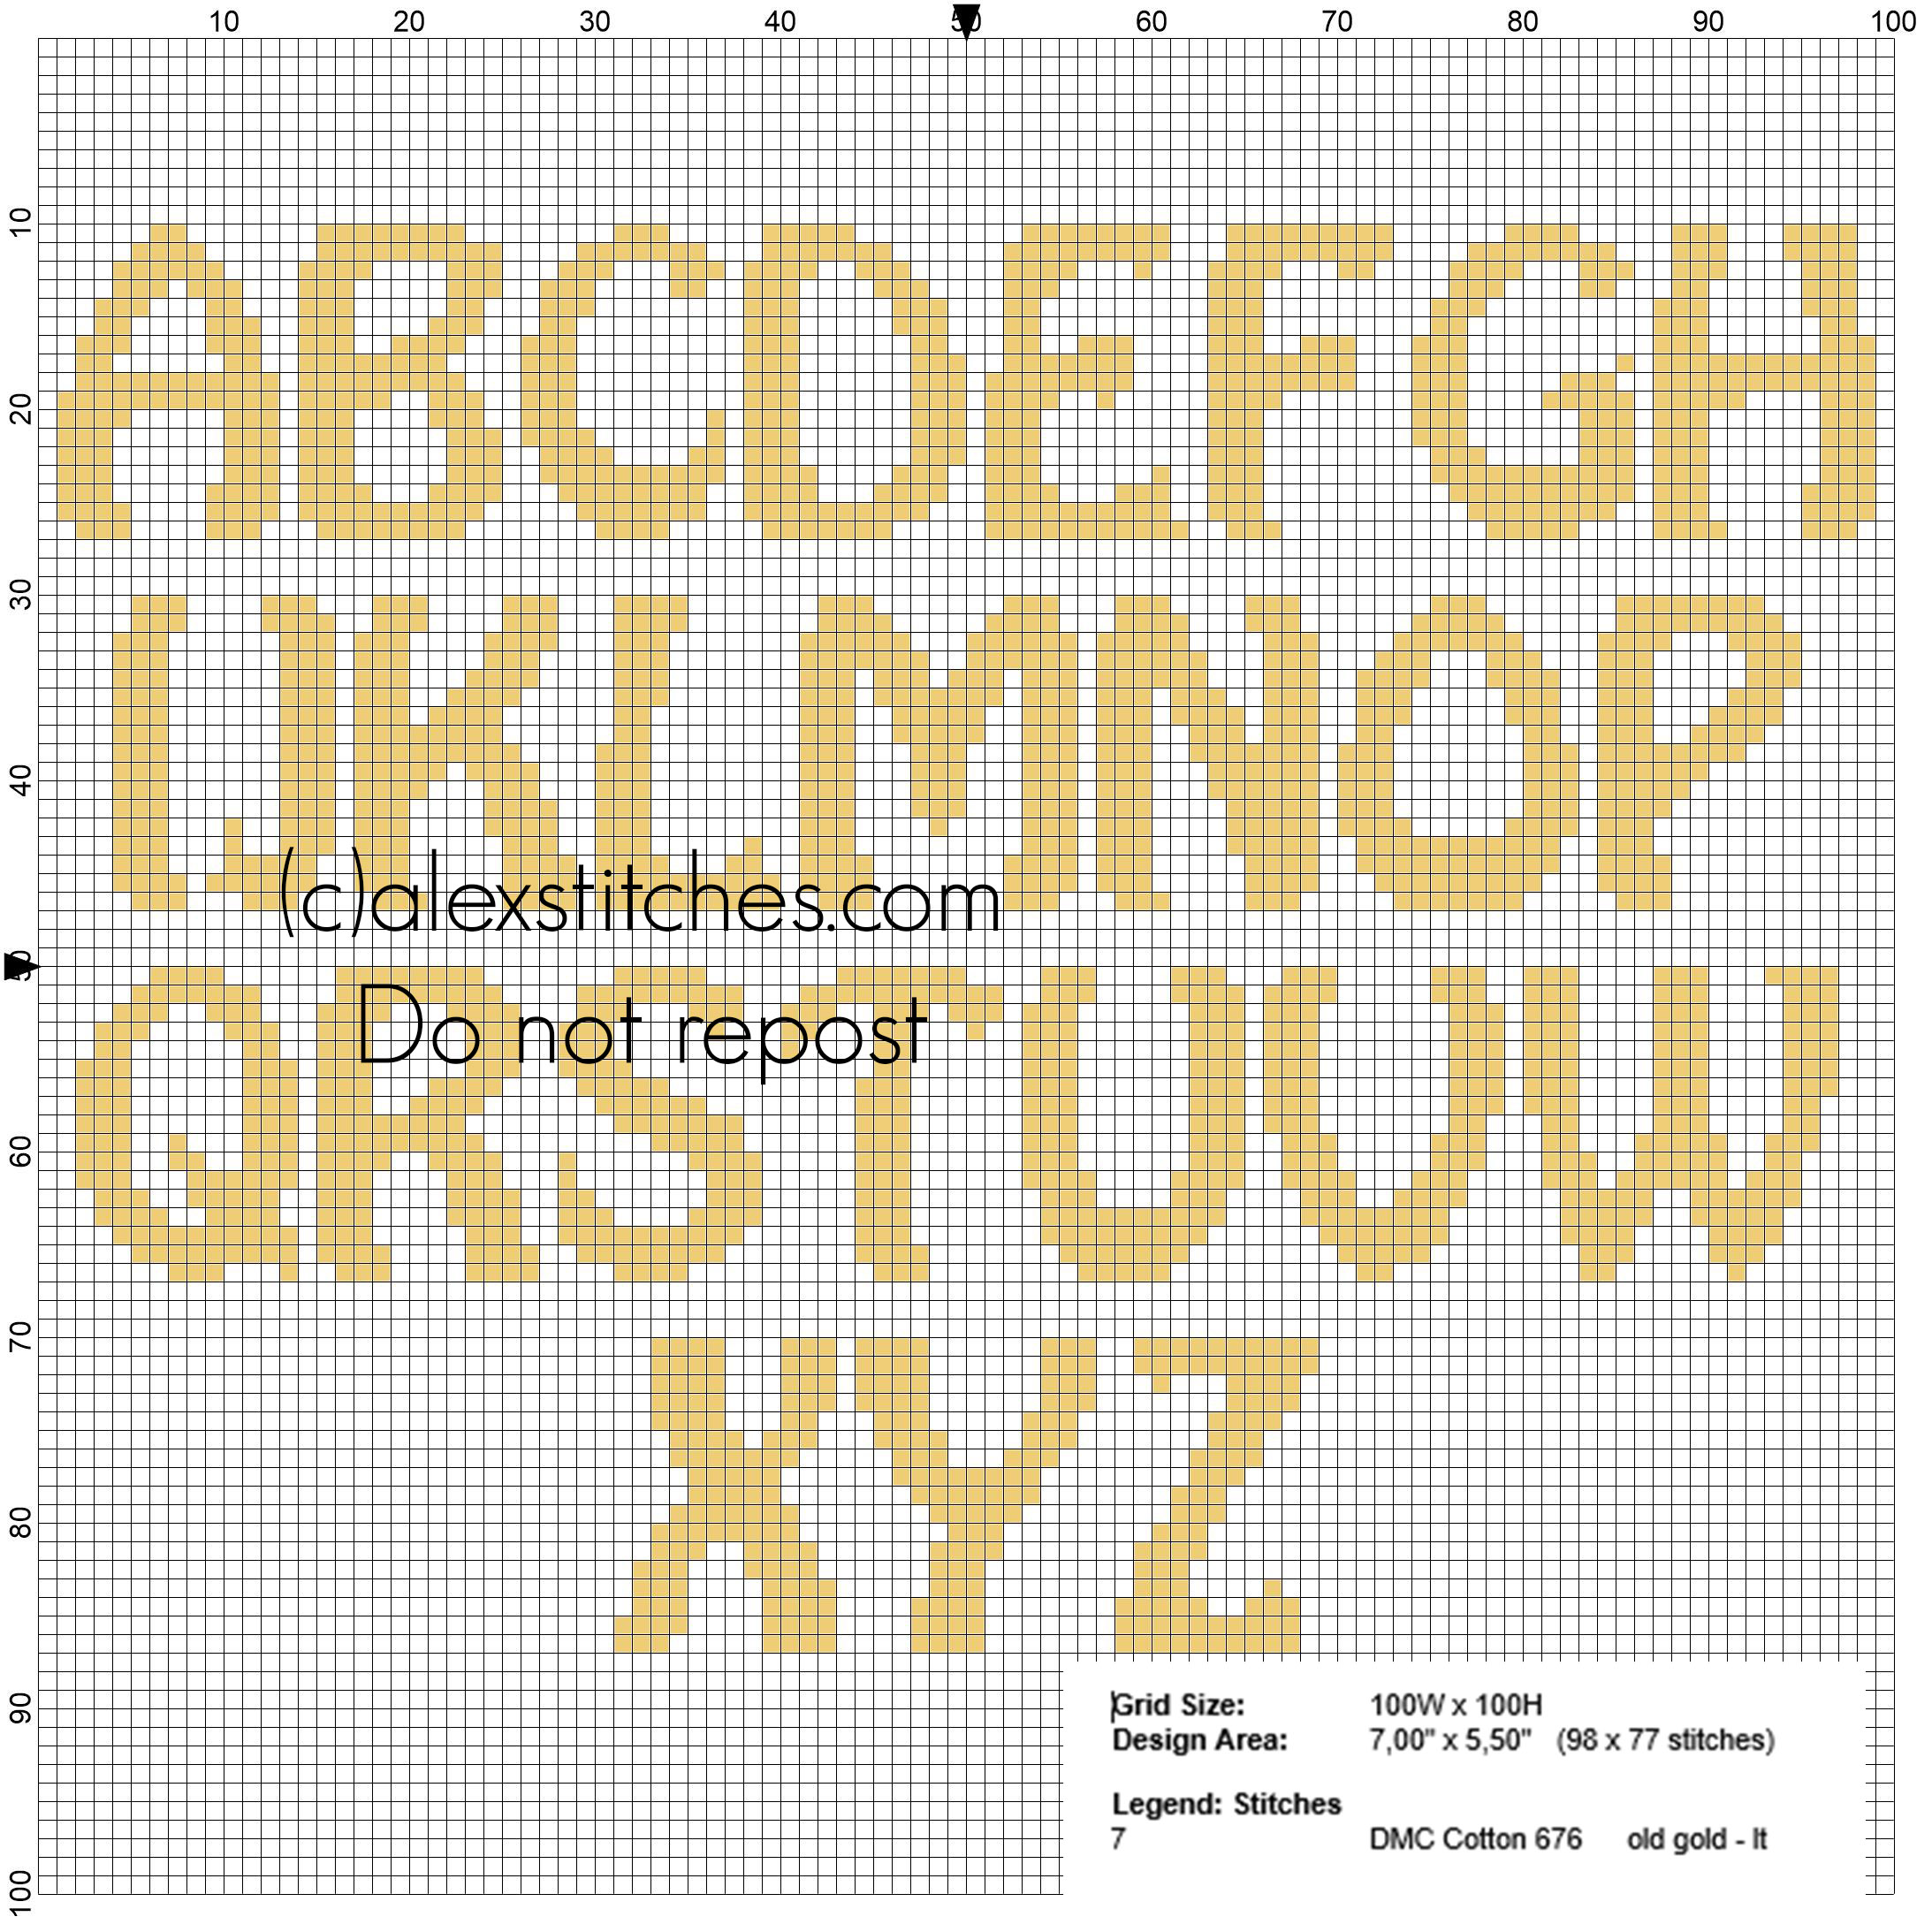 Uppercase Alphabet for cross stitch names with Minions